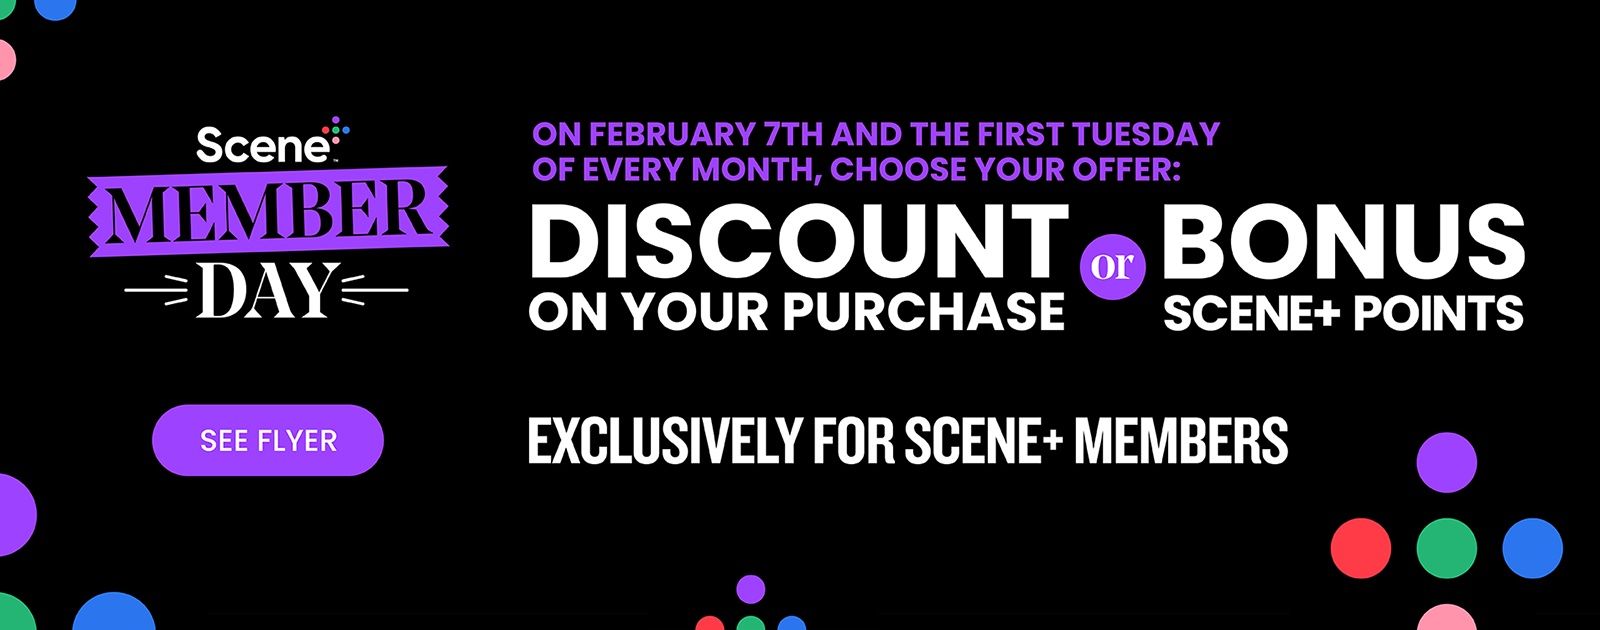 Scene+ Member Day. On February 7th and the first Tuesday of every month, choose your offer: discount on your purchase or bonus Scene+ points. Exclusively for Scene+ members